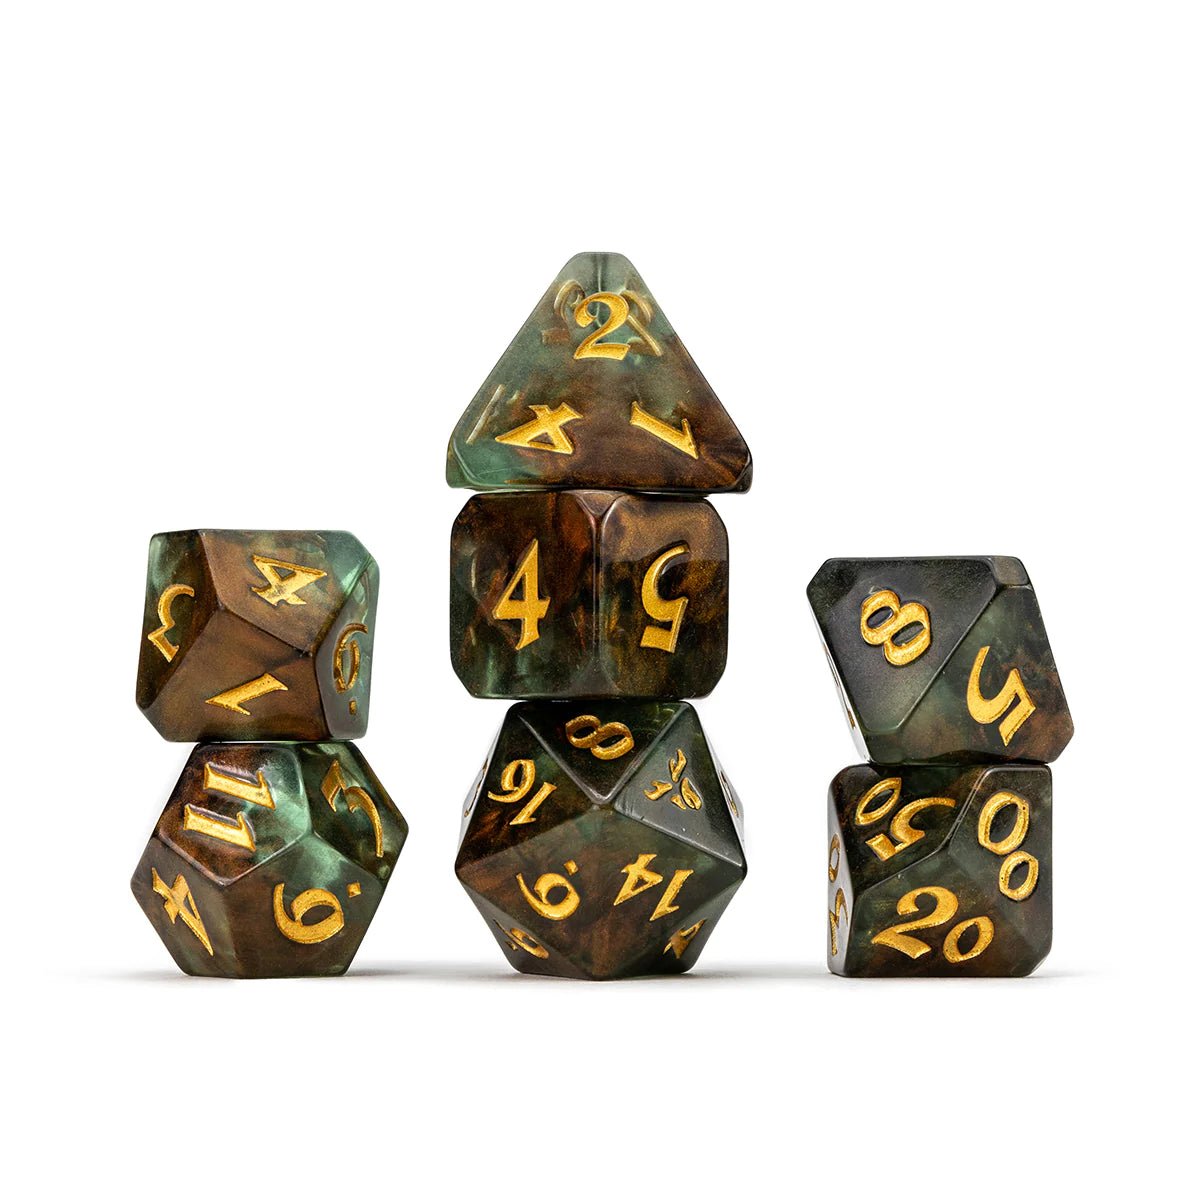 Vox Machina Dice Set: Keyleth (Green/Natural) - The Fourth Place